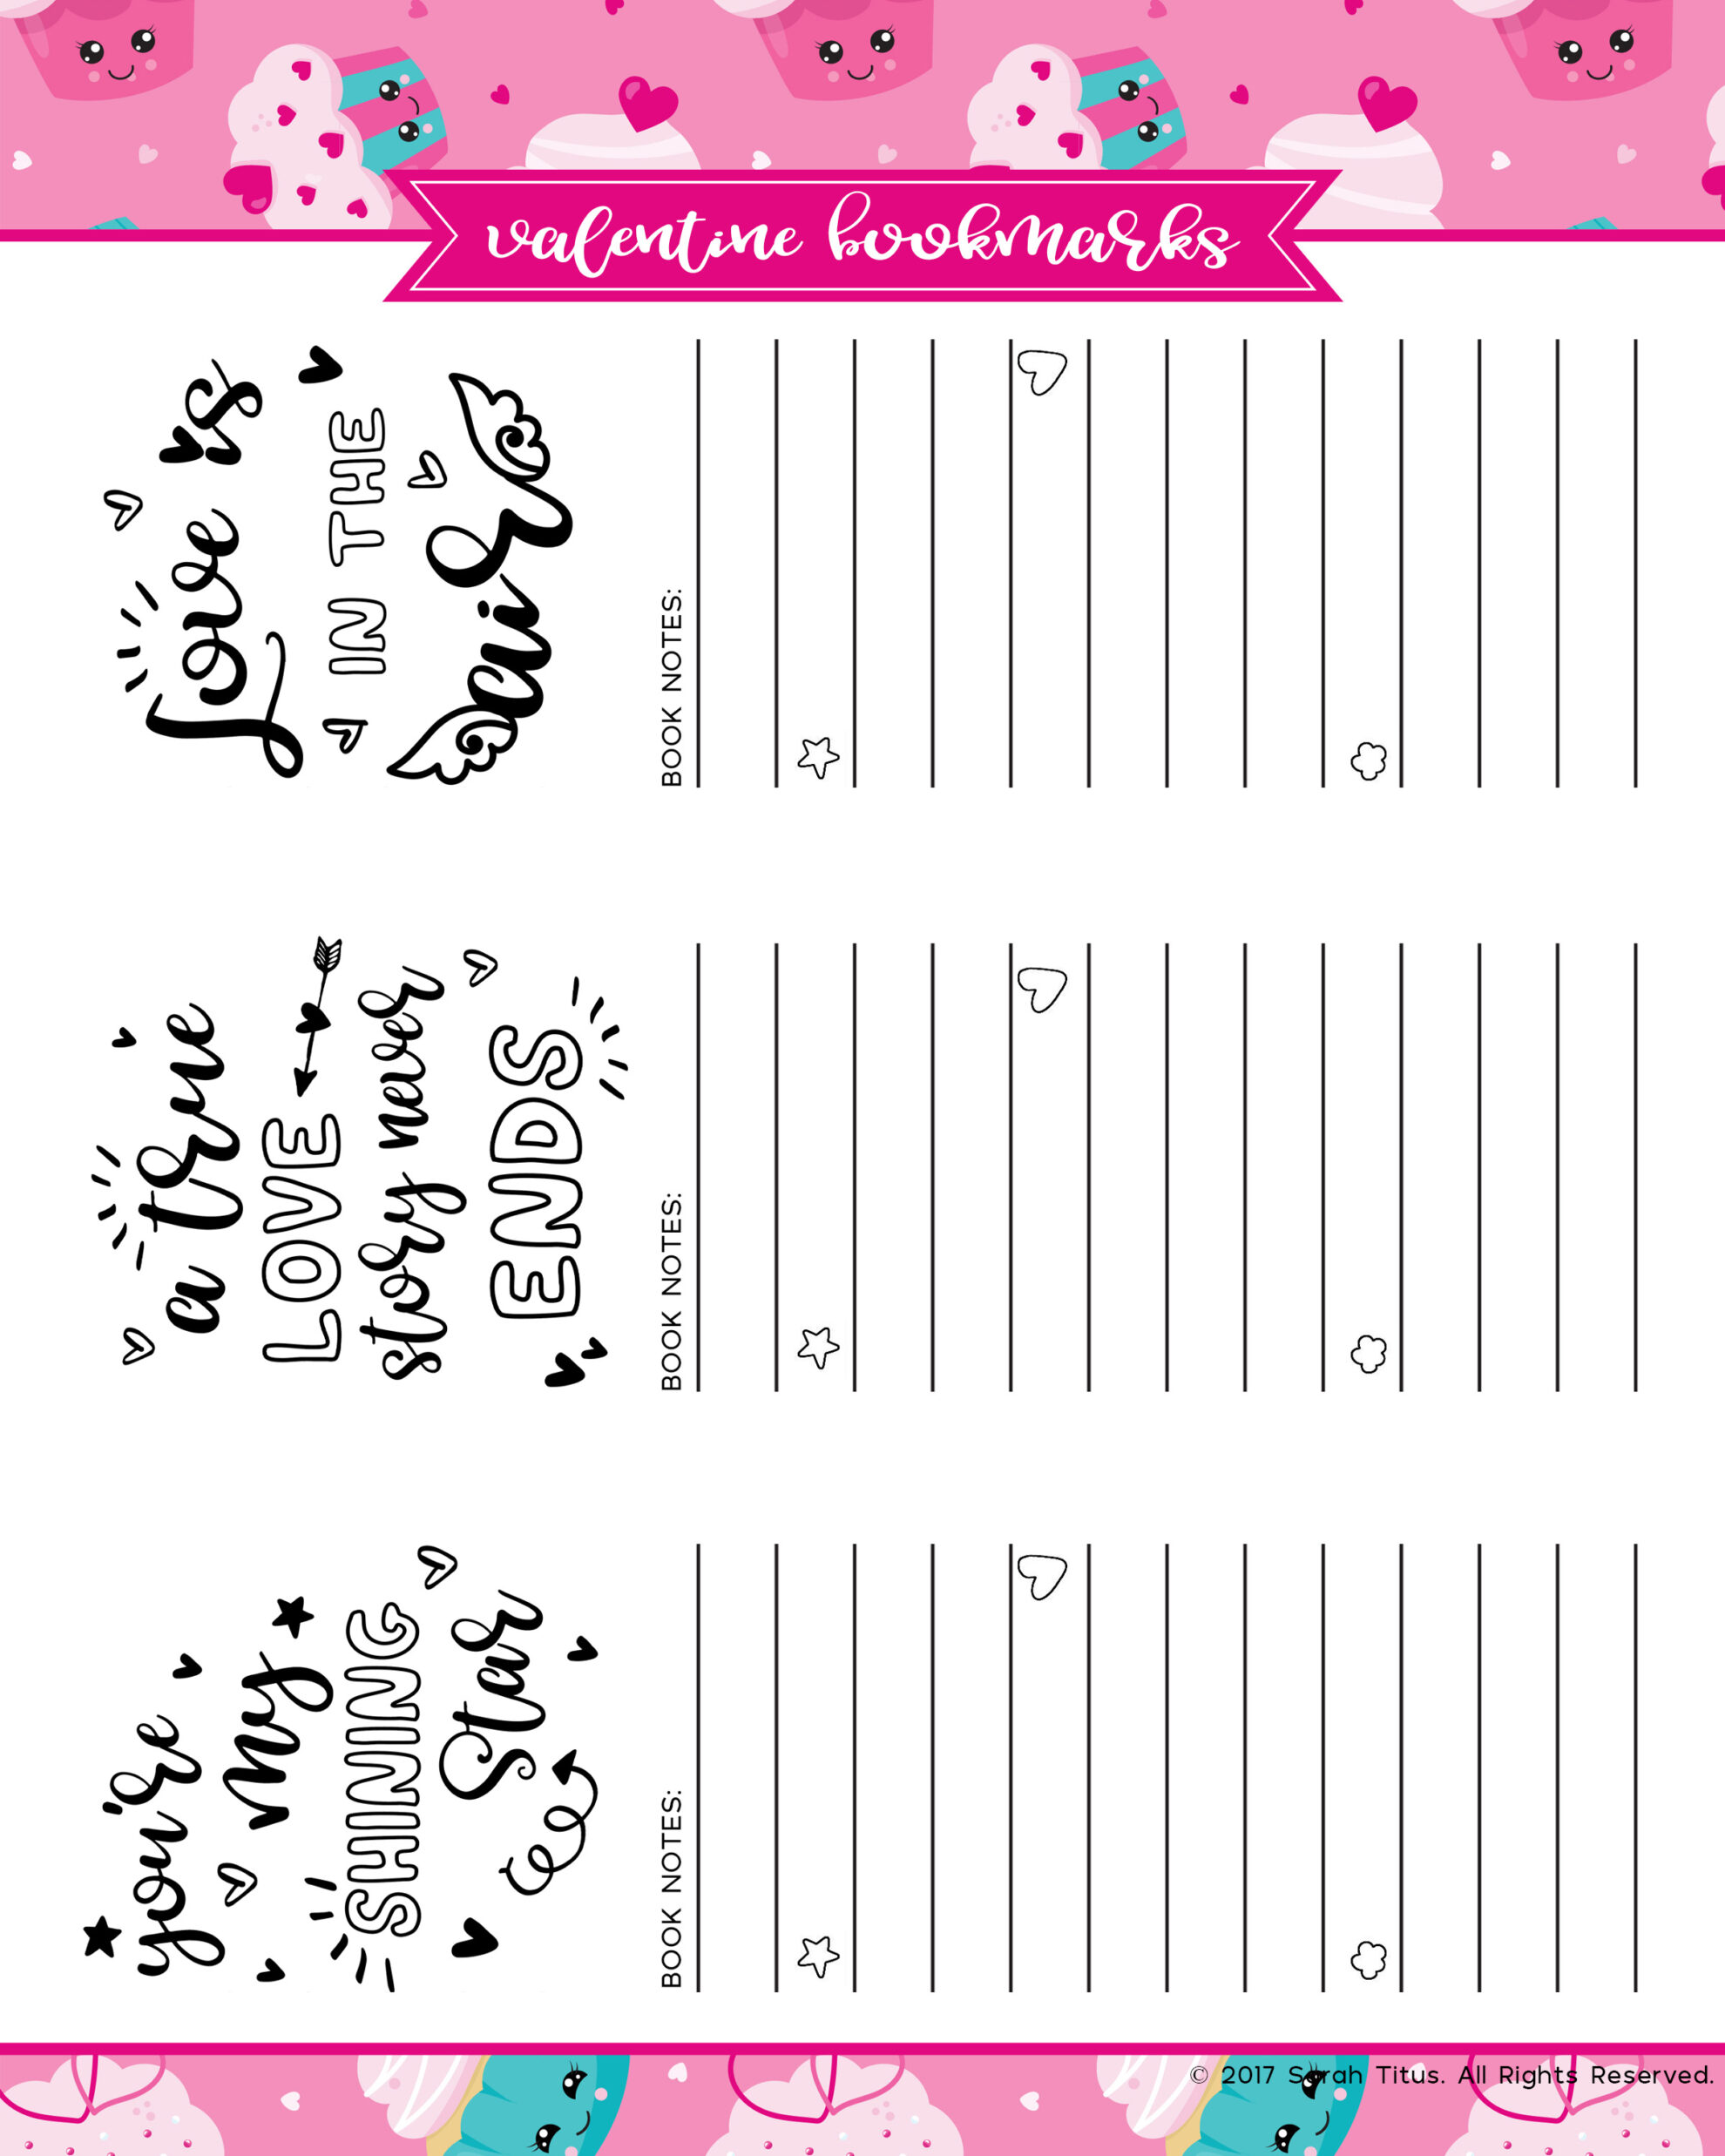 Do you like to color? Want some fun and interesting free printable romantic coloring bookmarks? Here's some cute designs you're sure to love! #lovecoloring